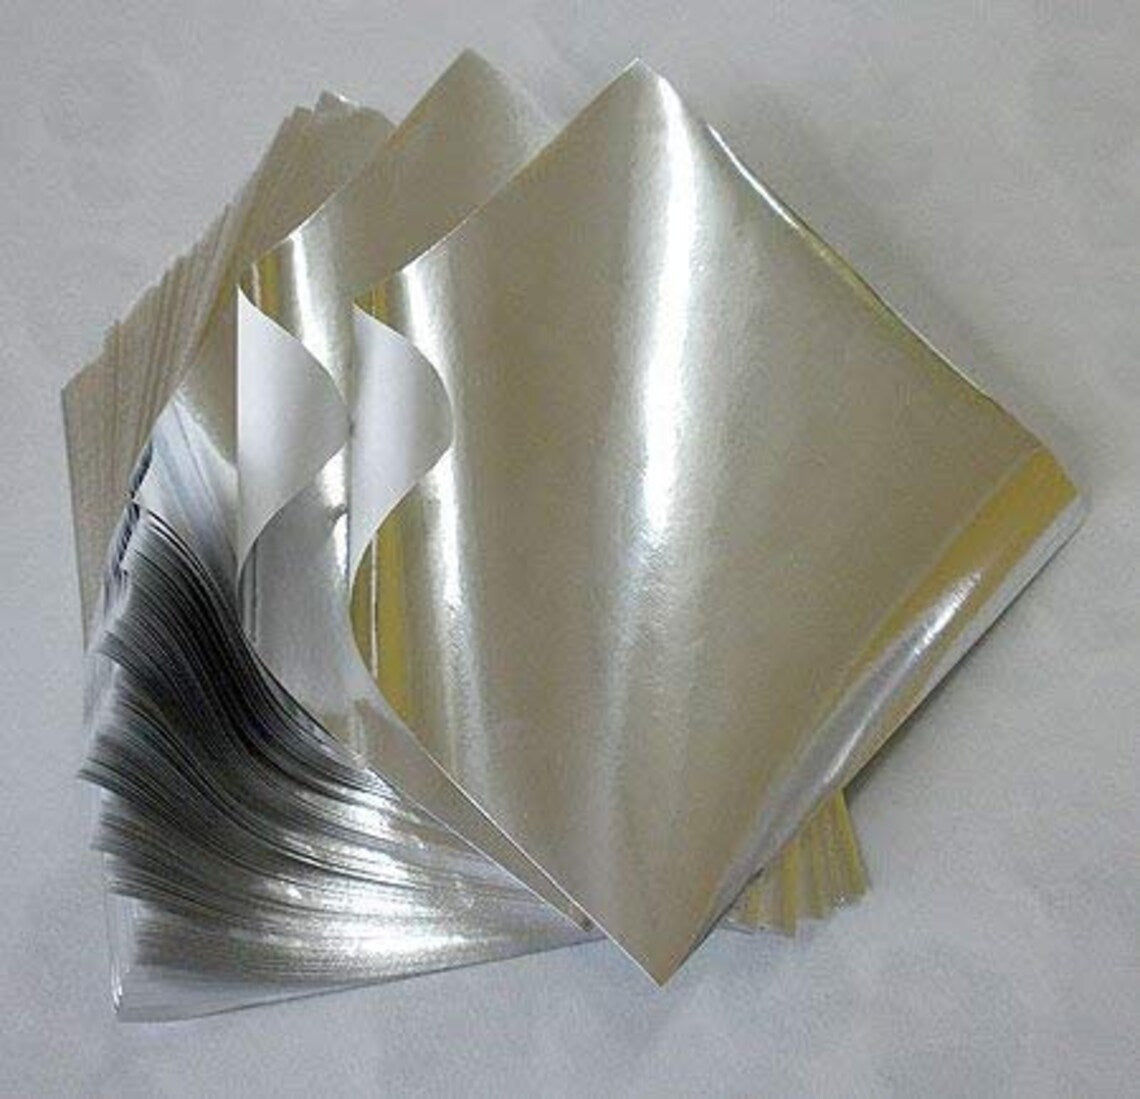 LuPro 500 Sheets Japanese Extra Thick Silver Foil Origami Paper, 15 cm 6"